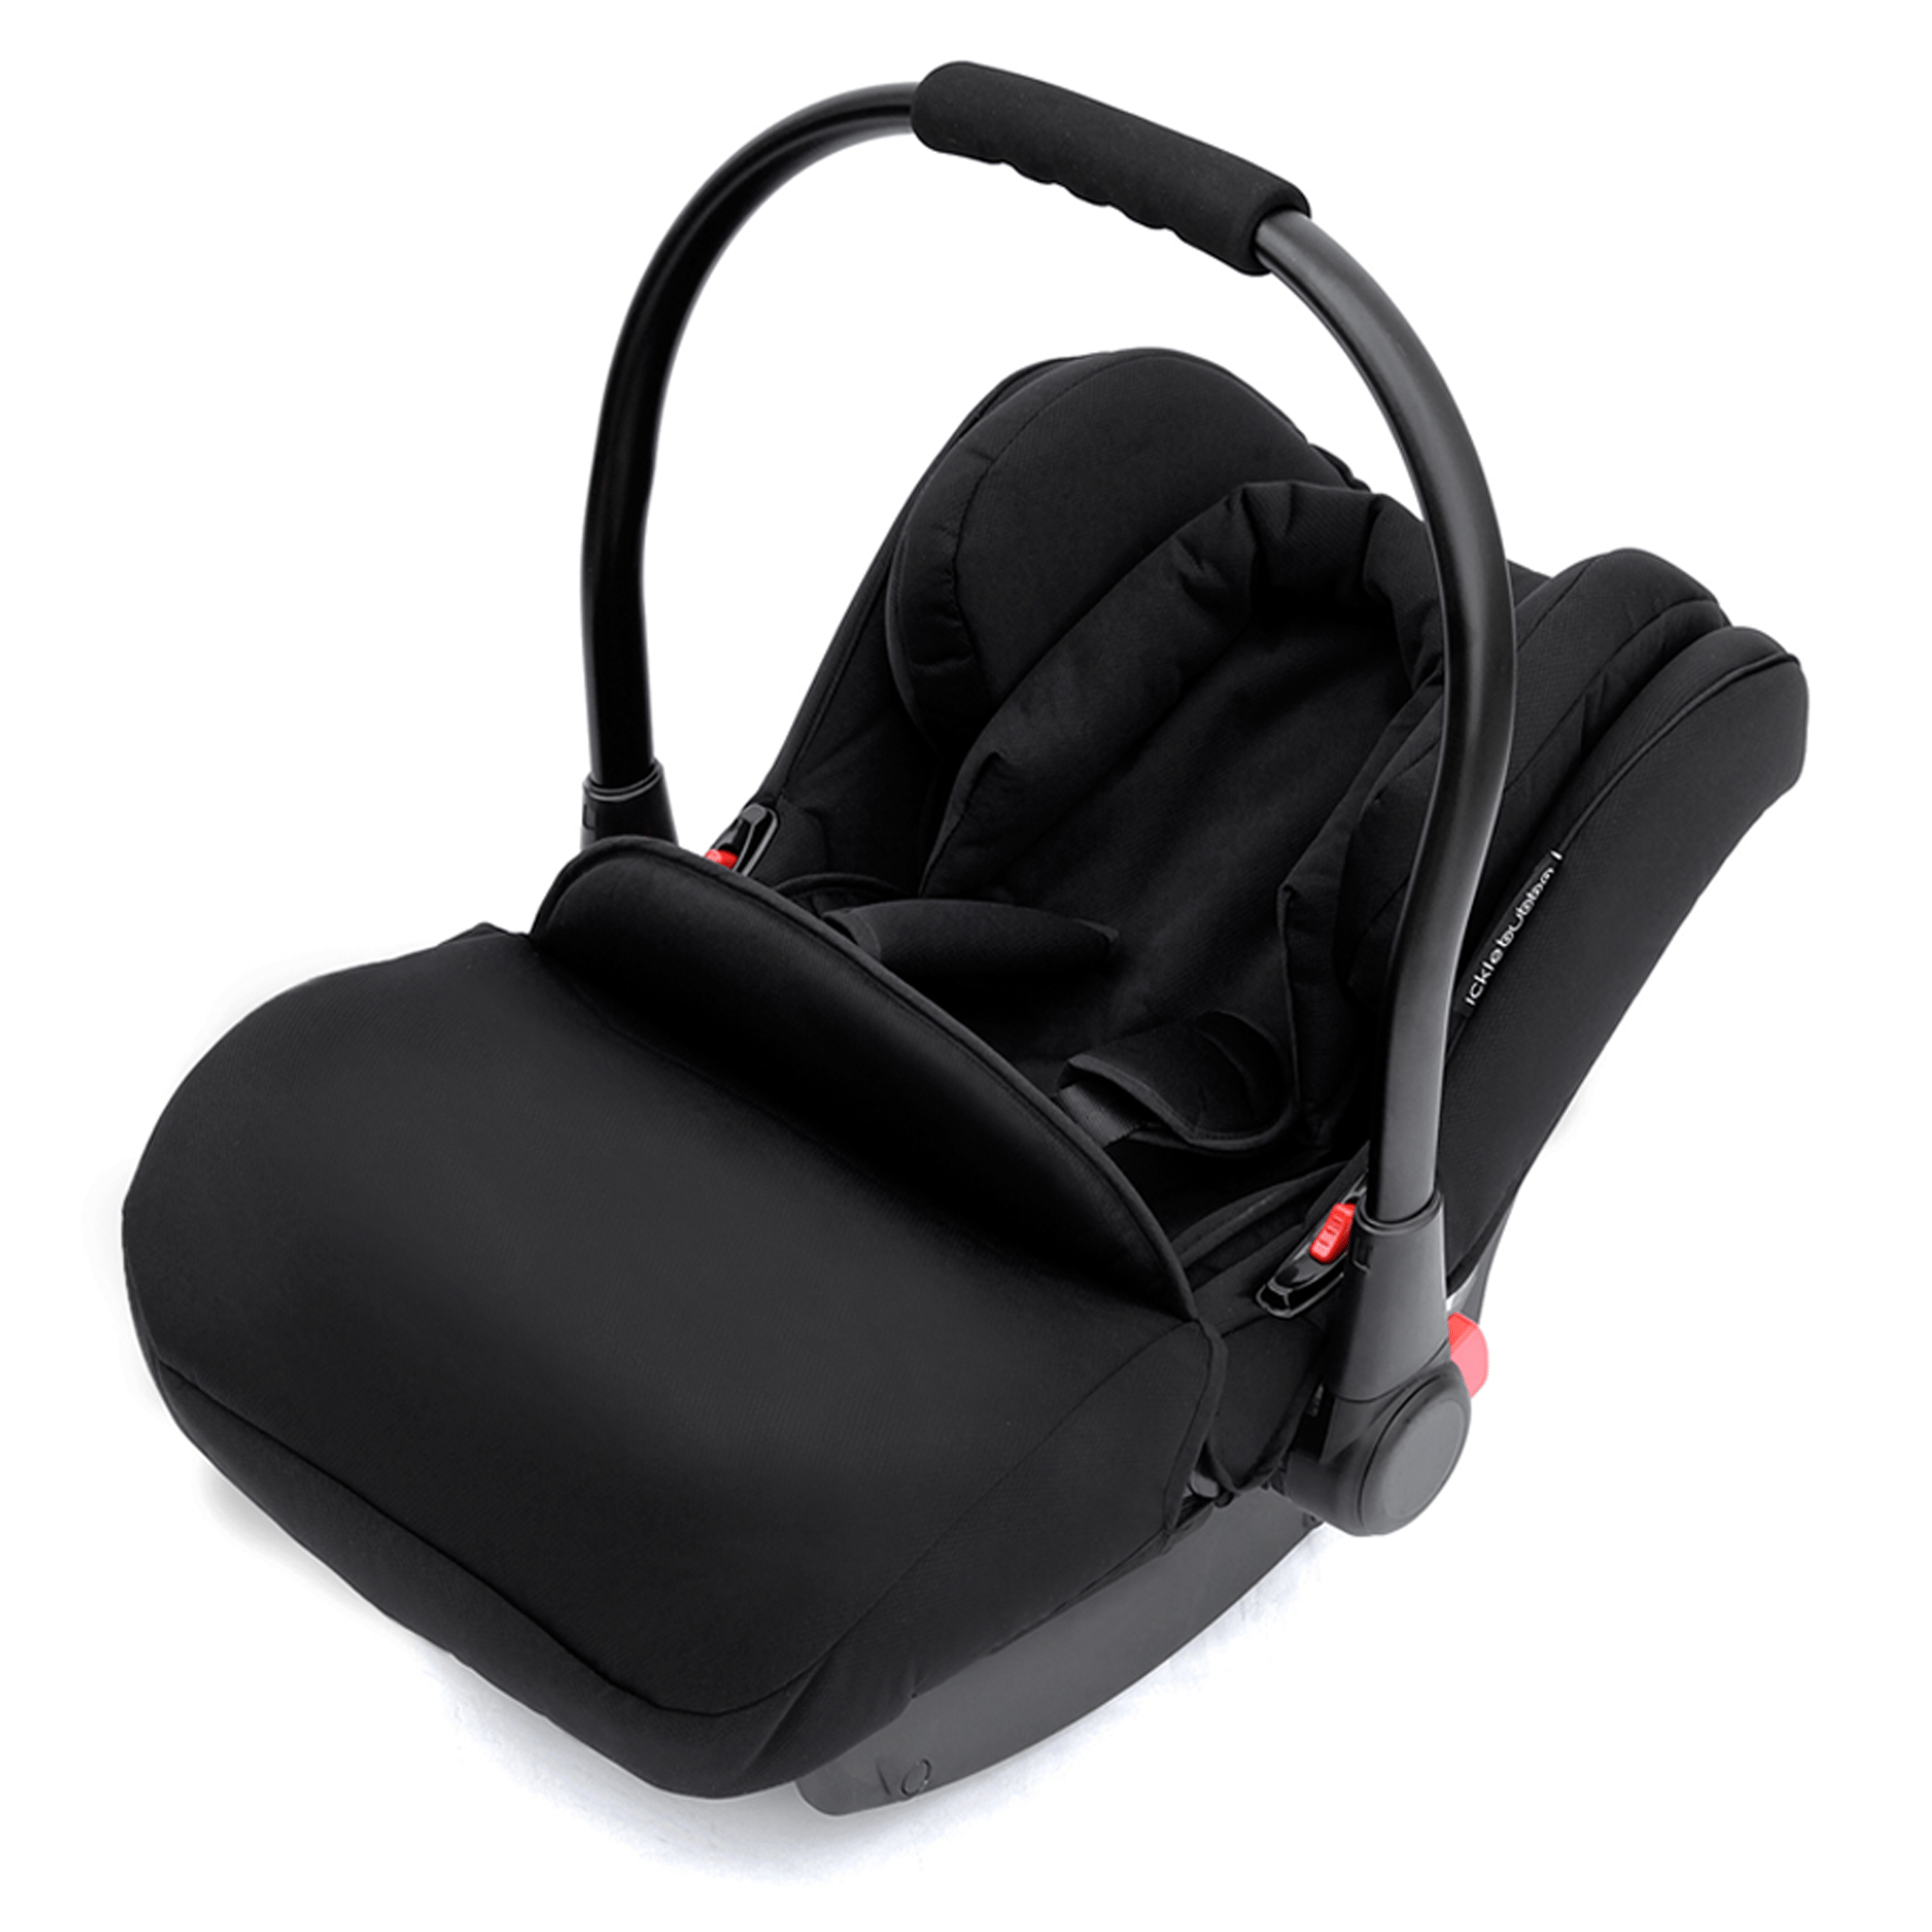 Ickle Bubba baby car seats Ickle Bubba Galaxy Group 0+ Infant Carrier Black 20-002-000-001